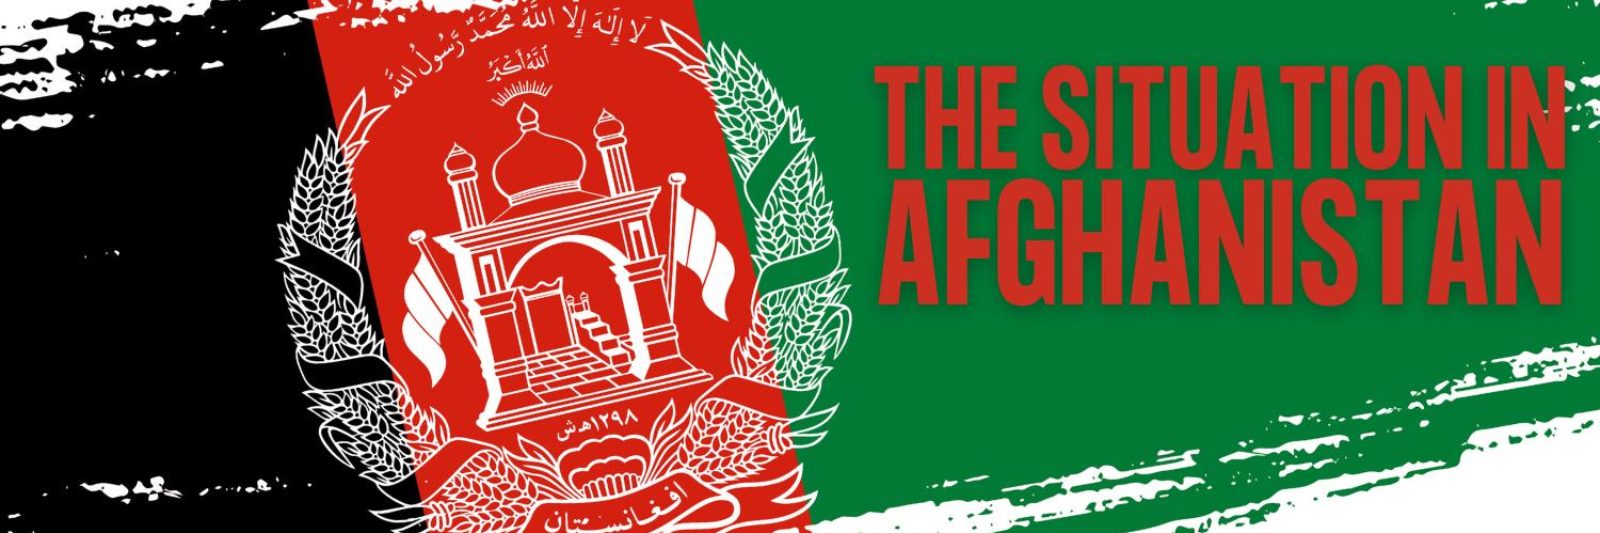 The situation in Afghanistan